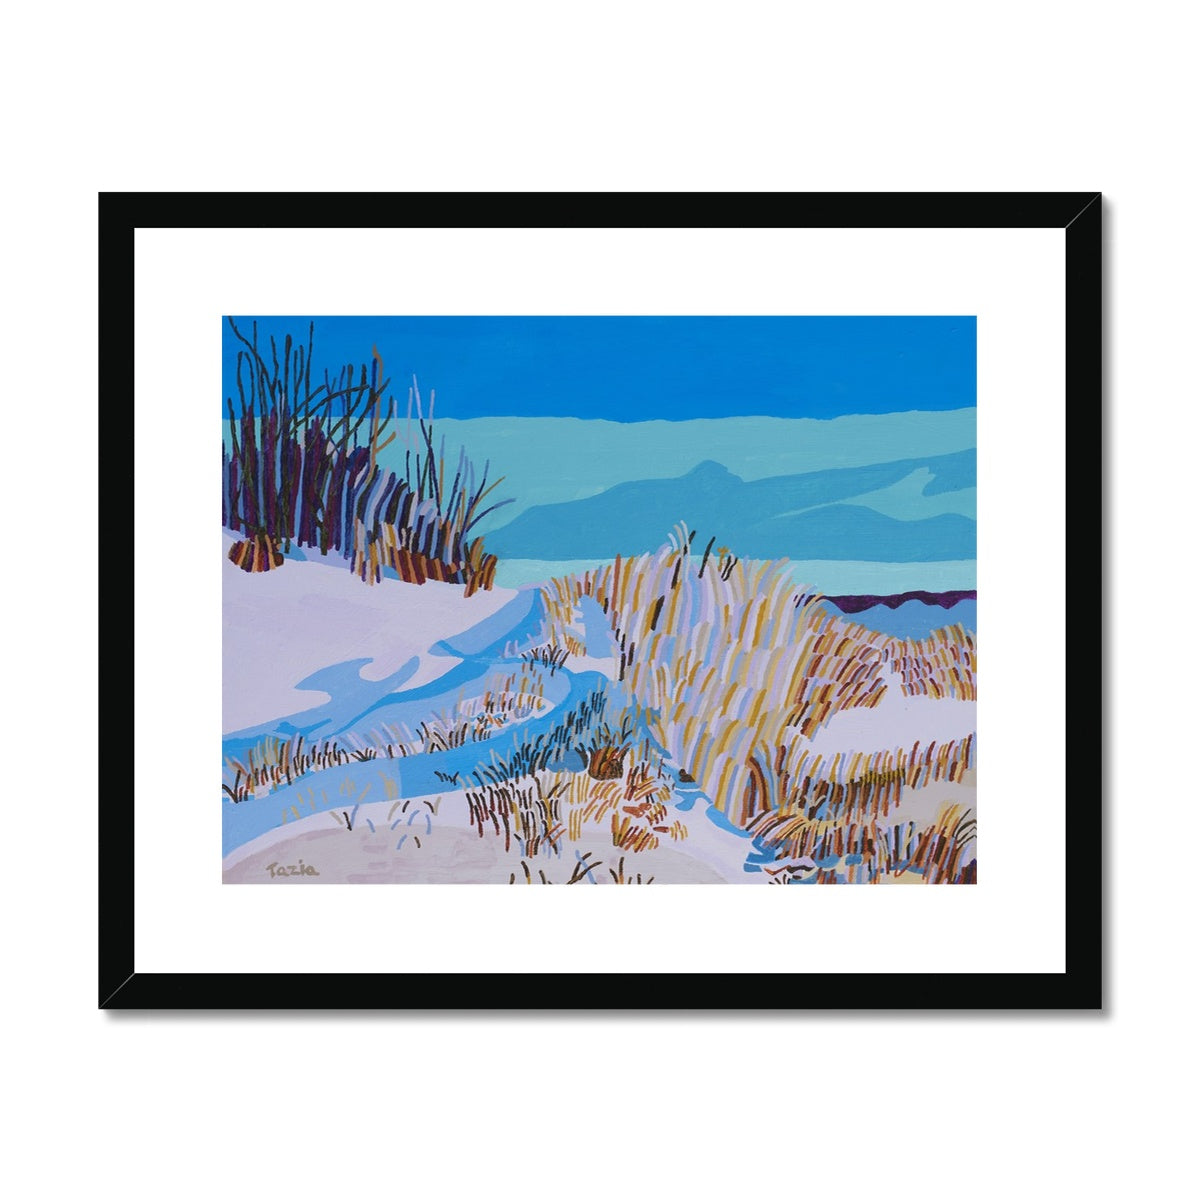 Snow in Norway, Framed & Mounted Print